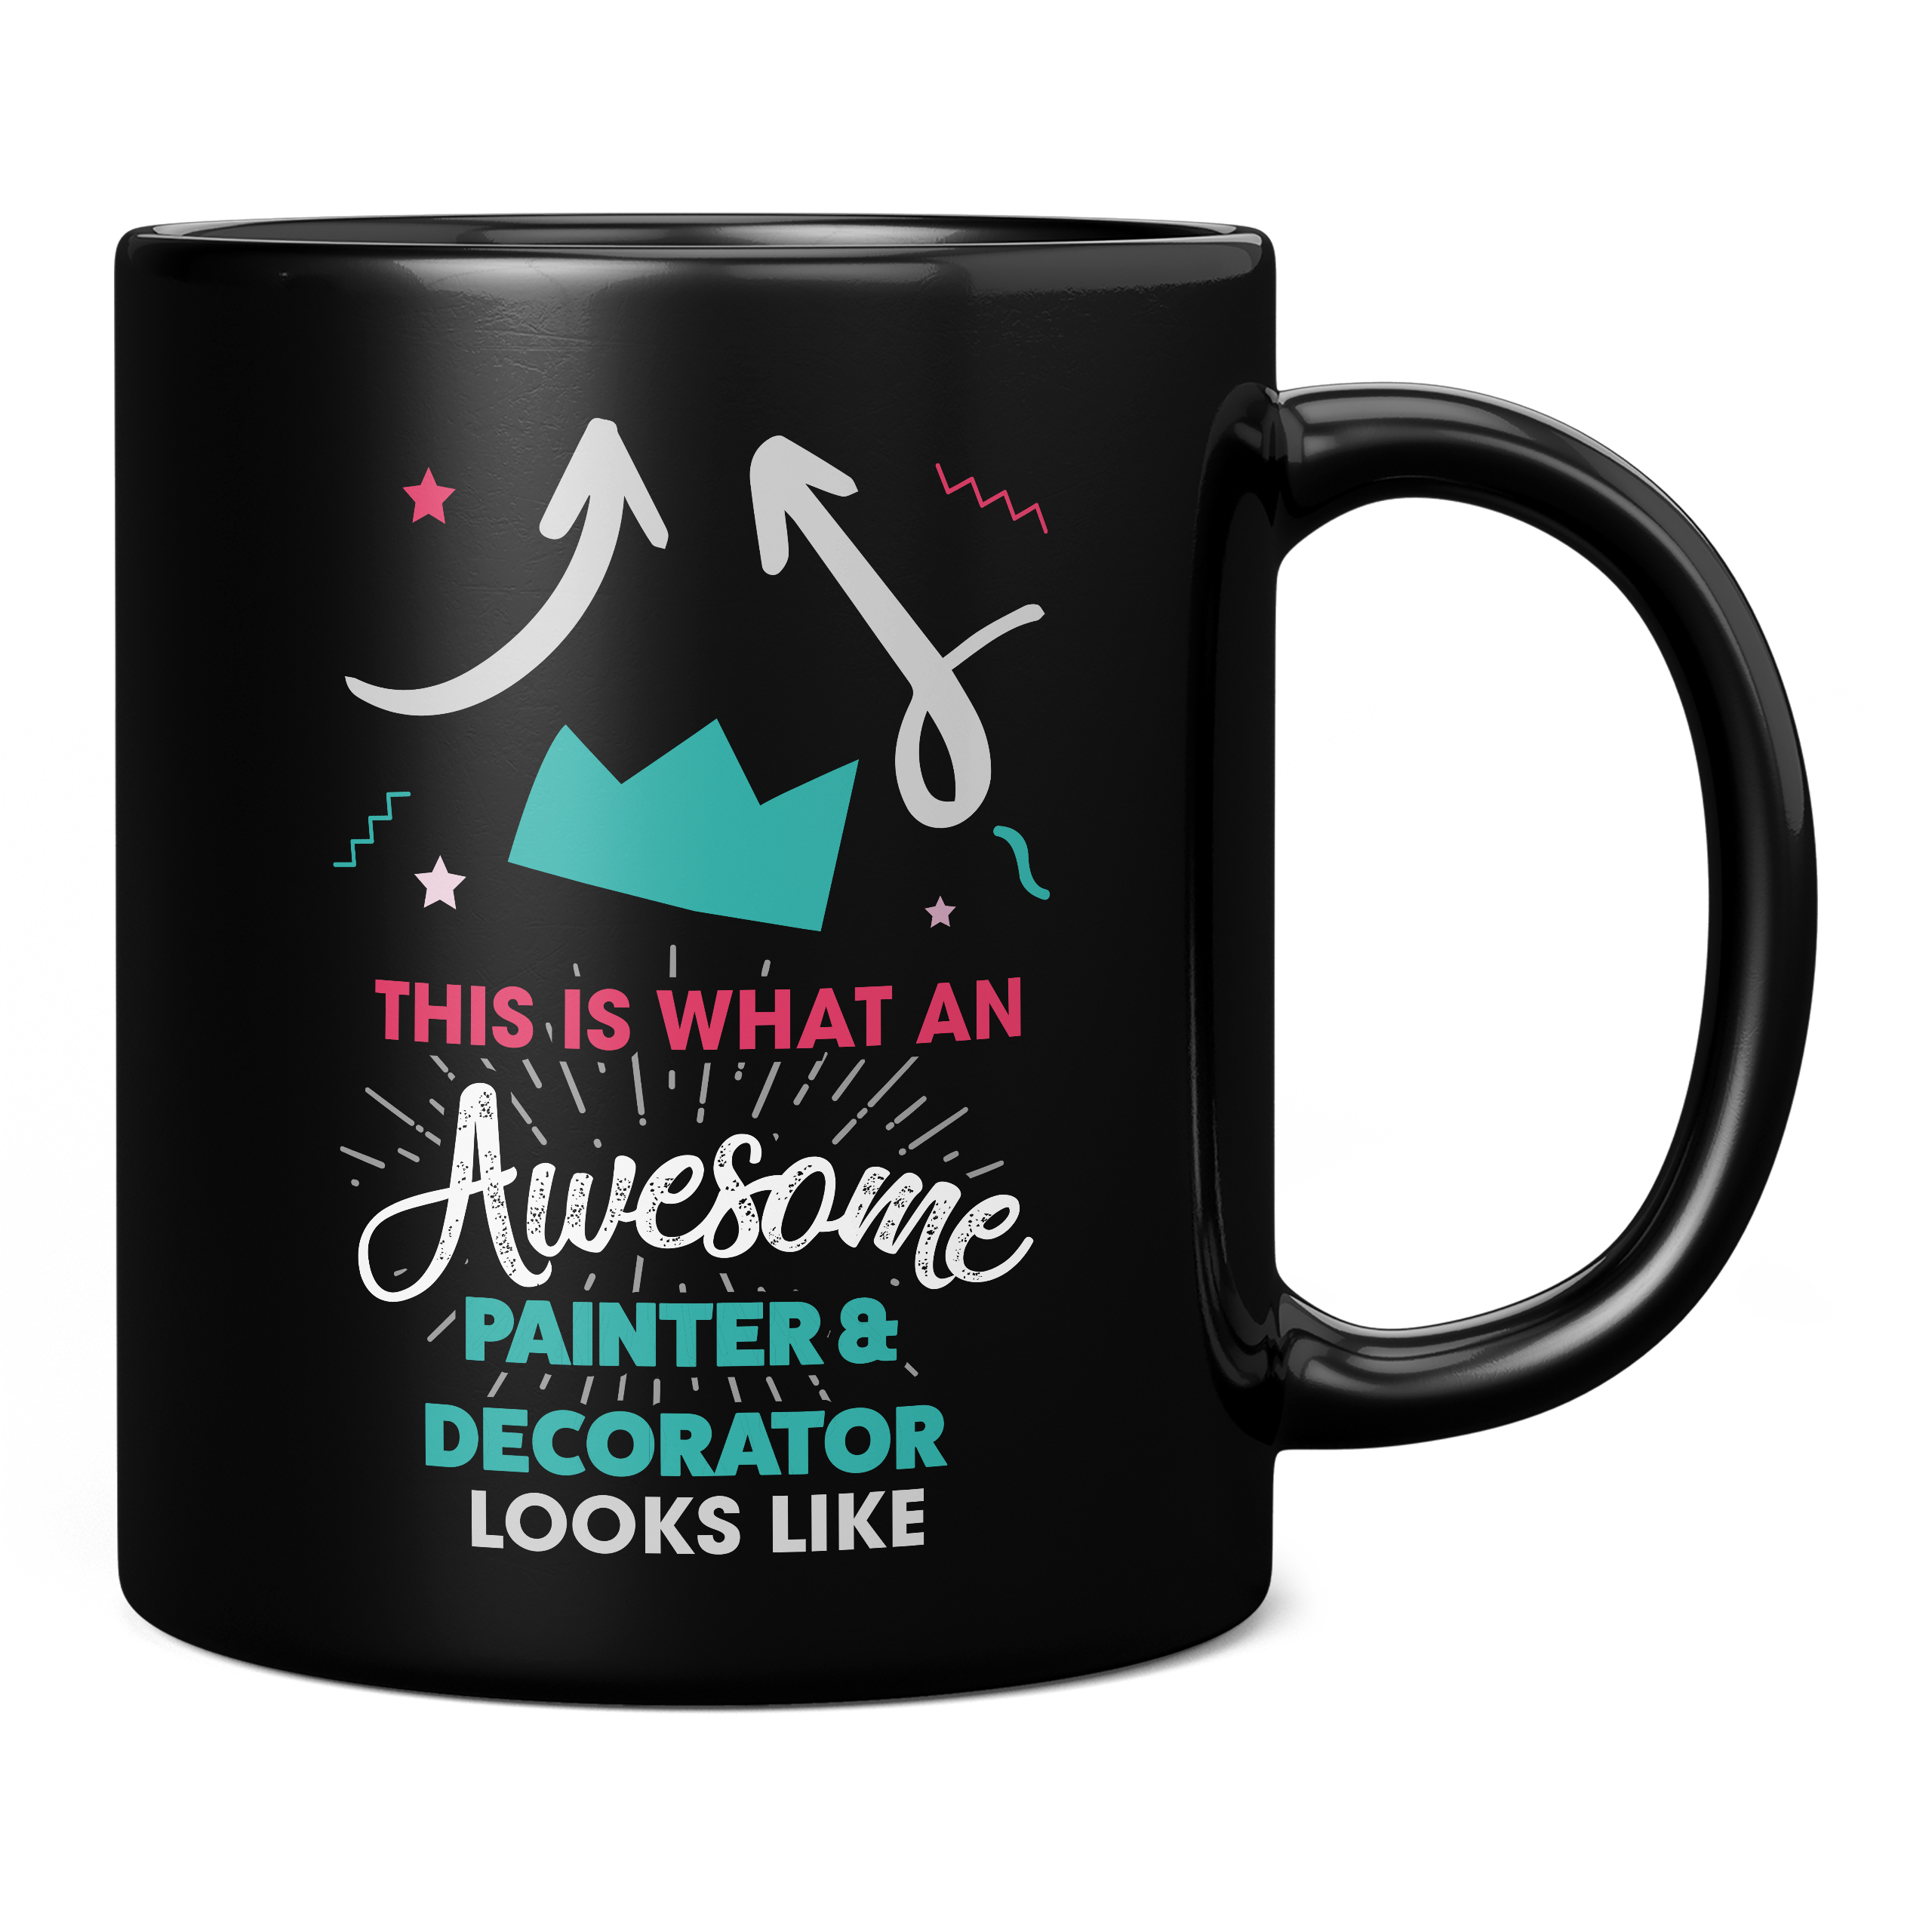 THIS IS WHAT AN AWESOME PAINTER & DECORATOR LOOKS LIKE 11OZ NOVELTY MUG